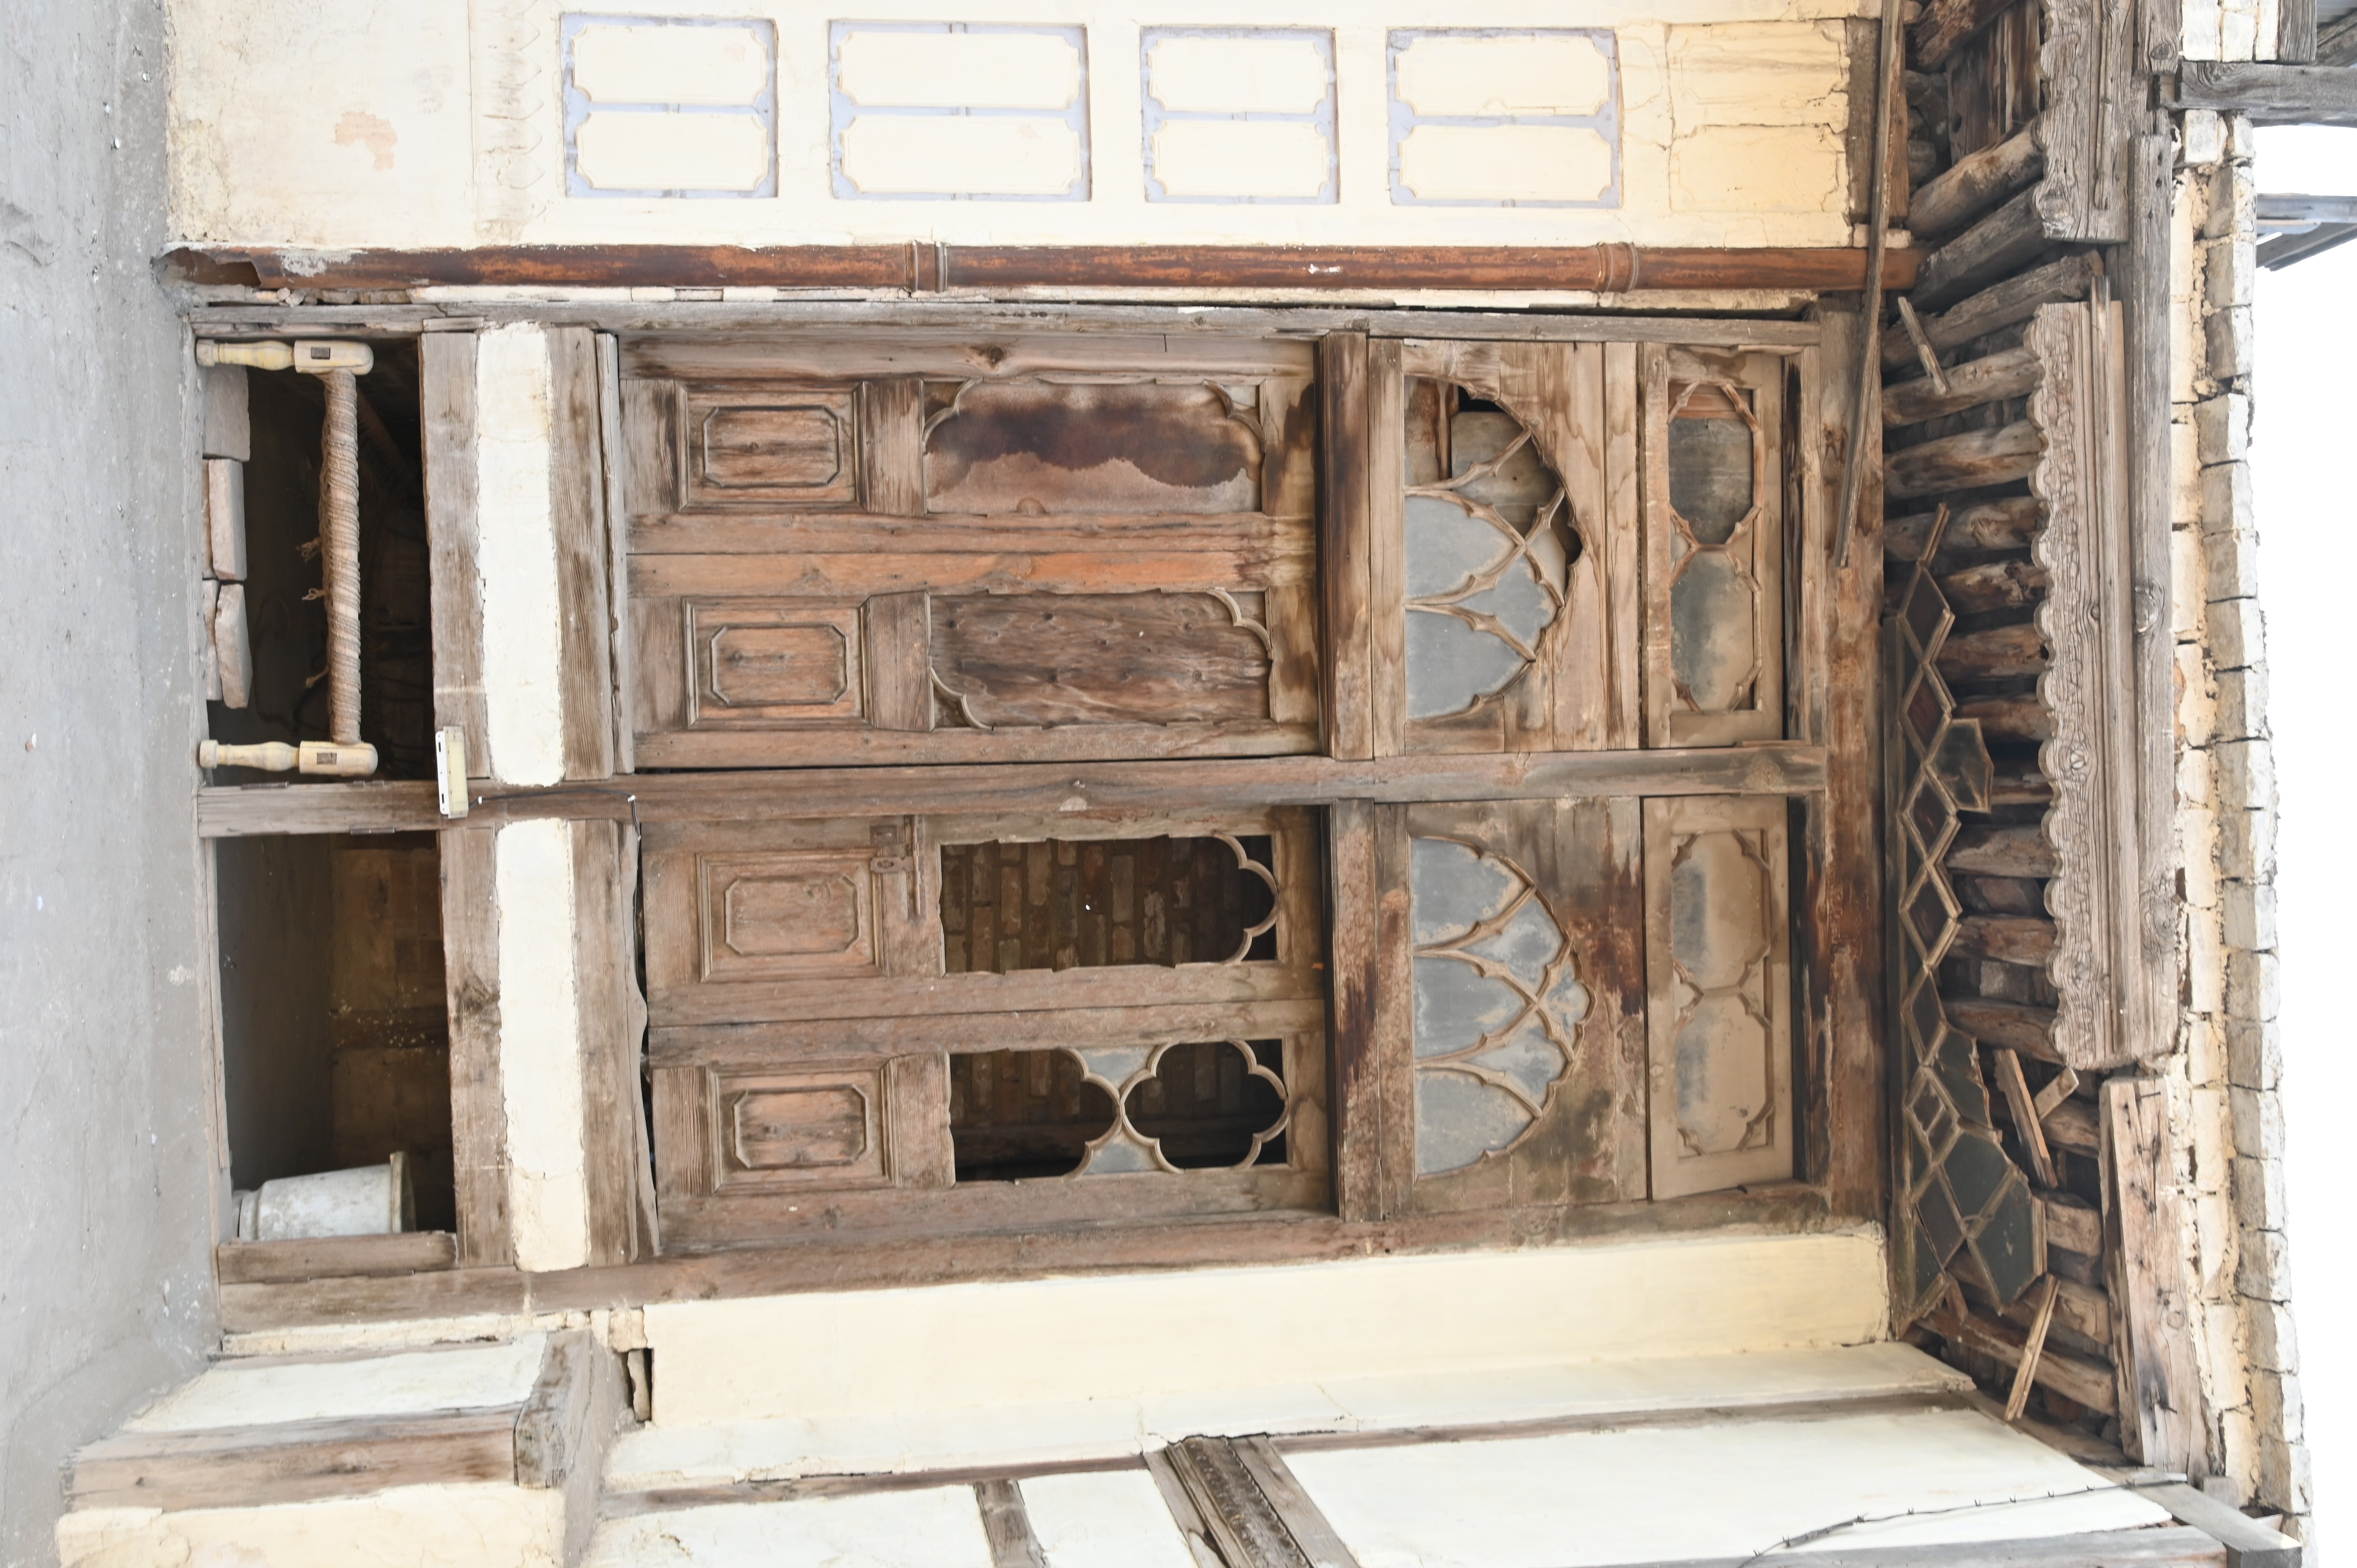 An old fashioned wooden window depicting the ancient culture